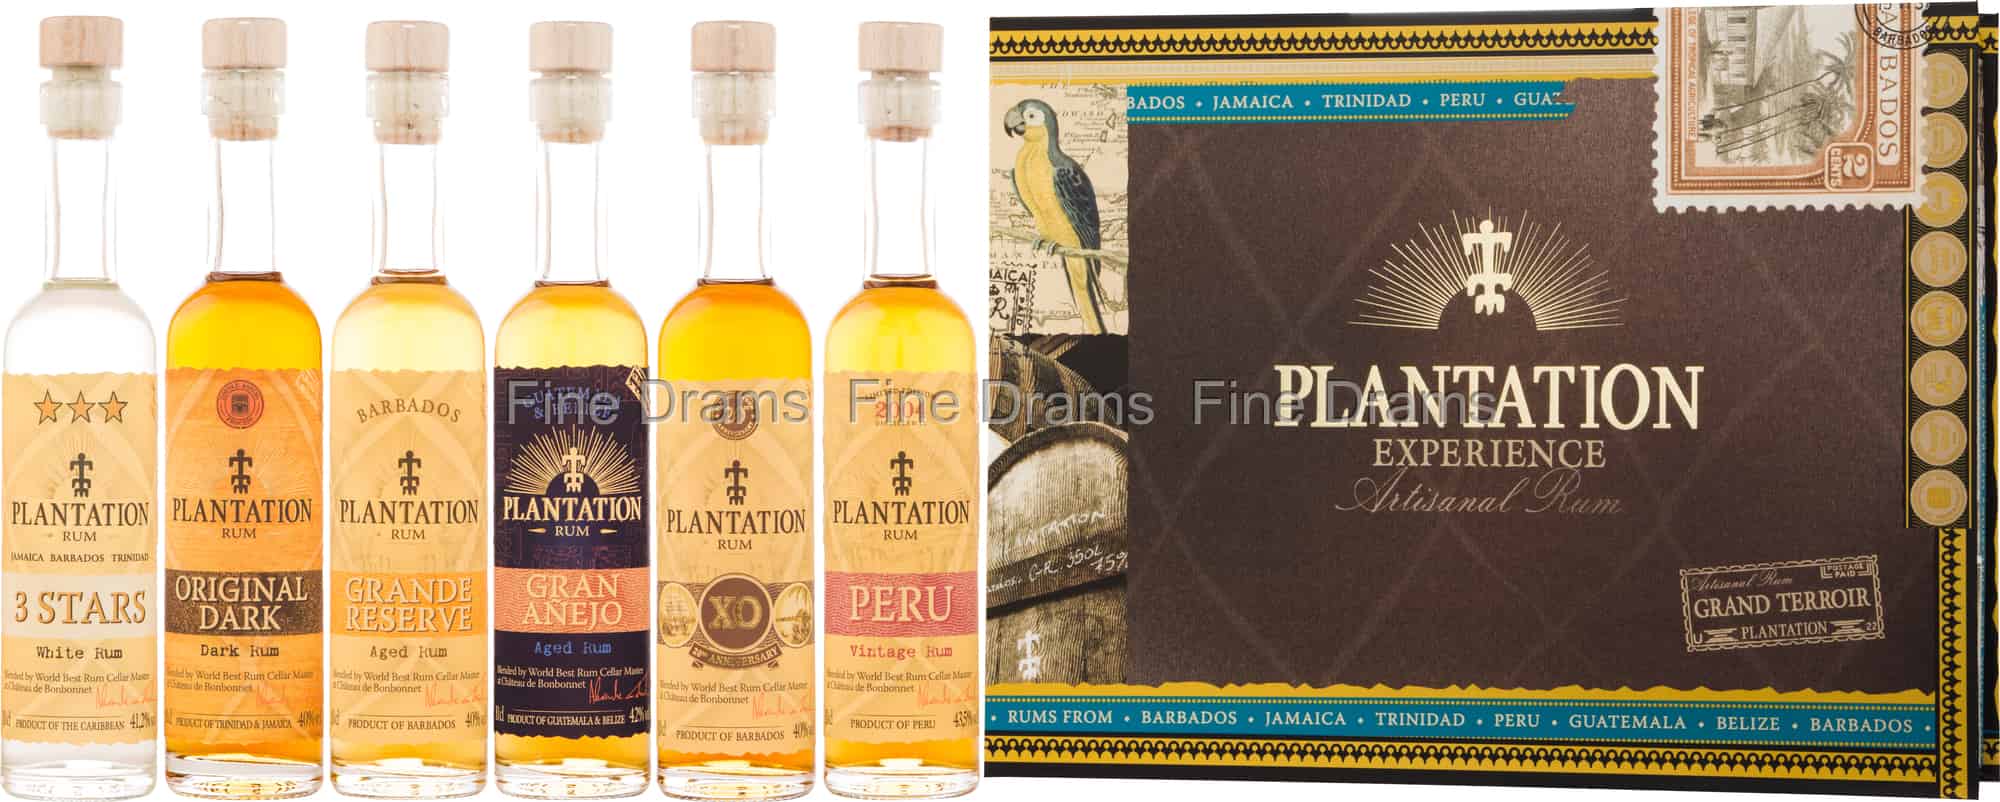 - Experience Plantation 6 x Pack 10 cl Gift Rum